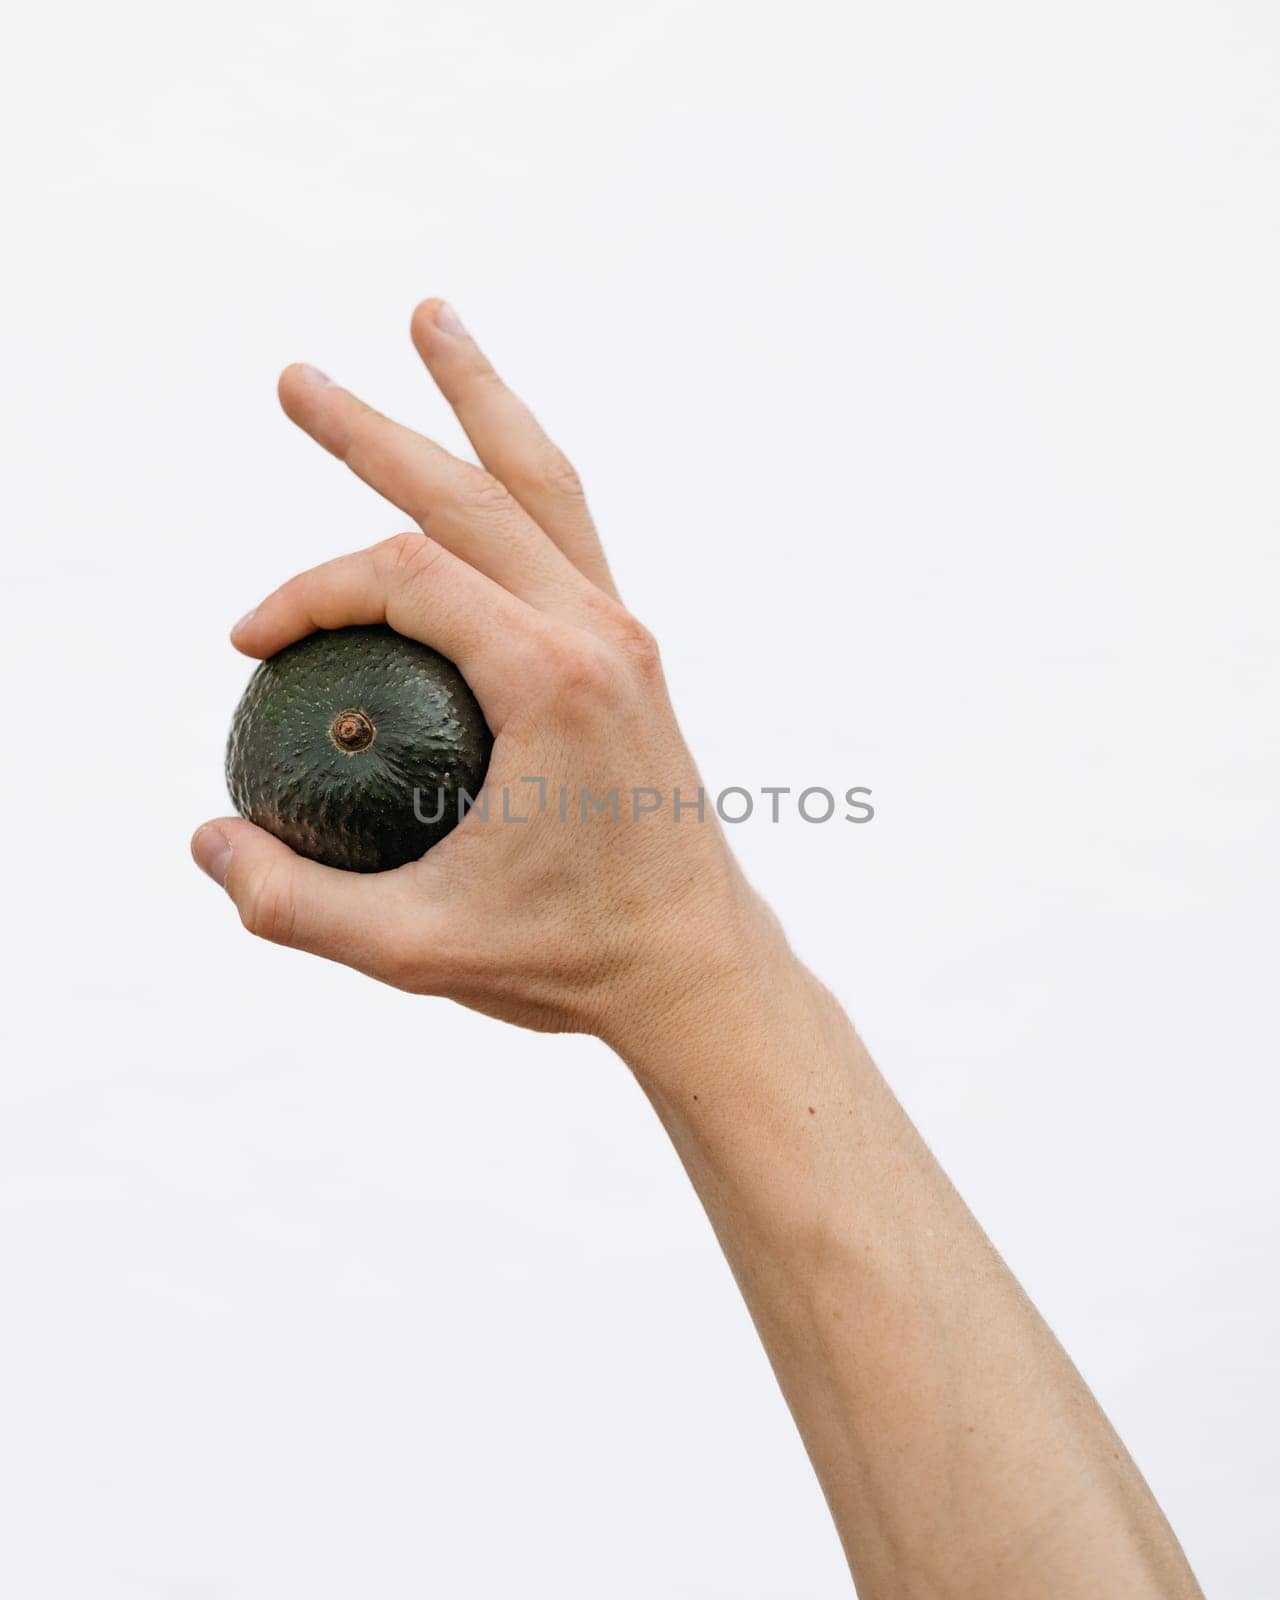 Hand presenting a ripe avocado against a clean white background by apavlin